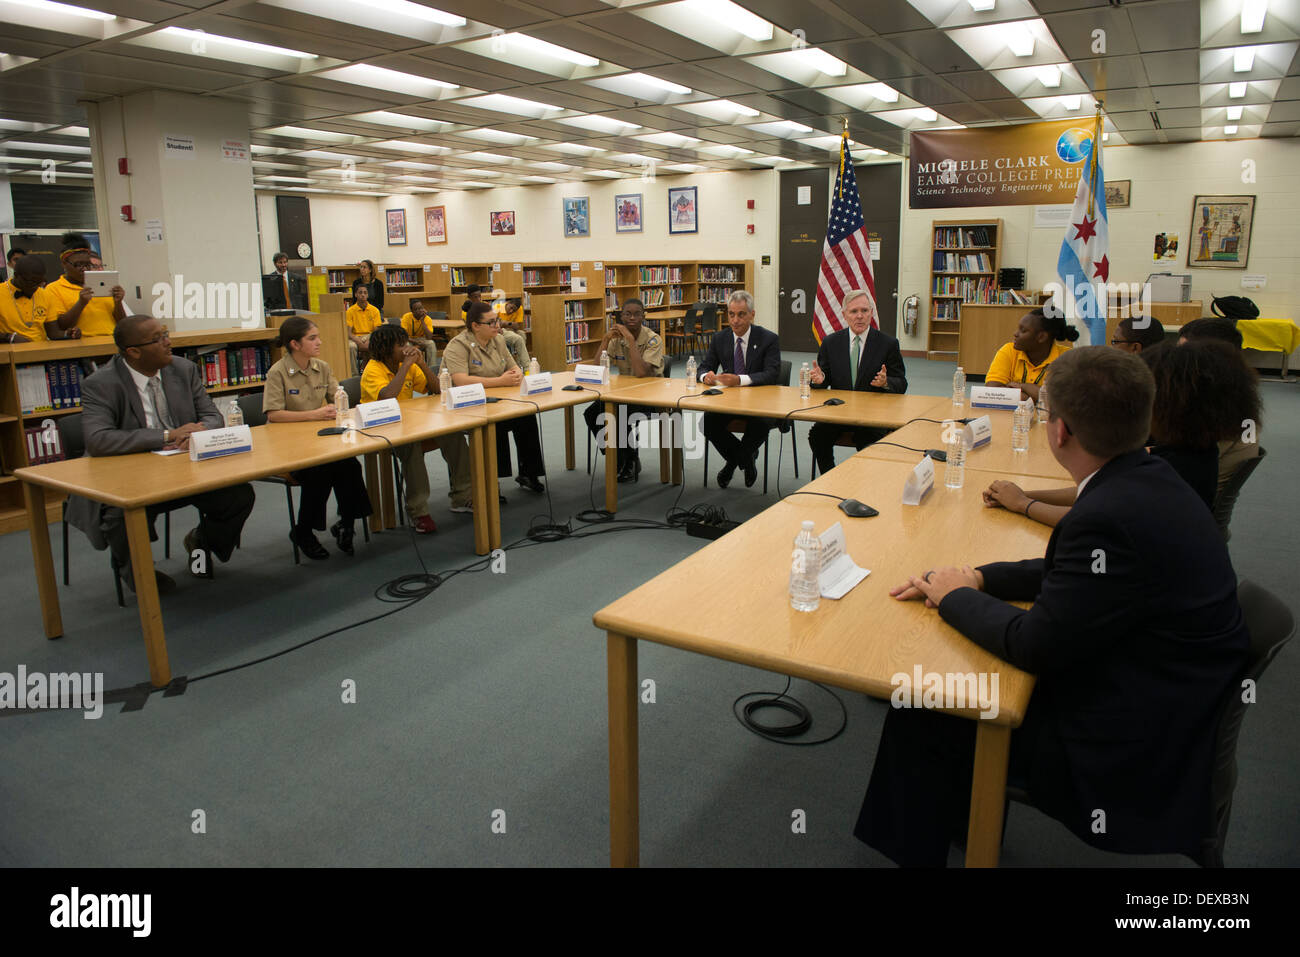 Secretary of the Navy Ray Mabus and Chicago Mayor Rahm Emanuel take part in a Science, Technology, Engineering and Mathematics (STEM) round table discussion with students from Michele Clark High School. During the event, Mabus reinforced the importance of Stock Photo